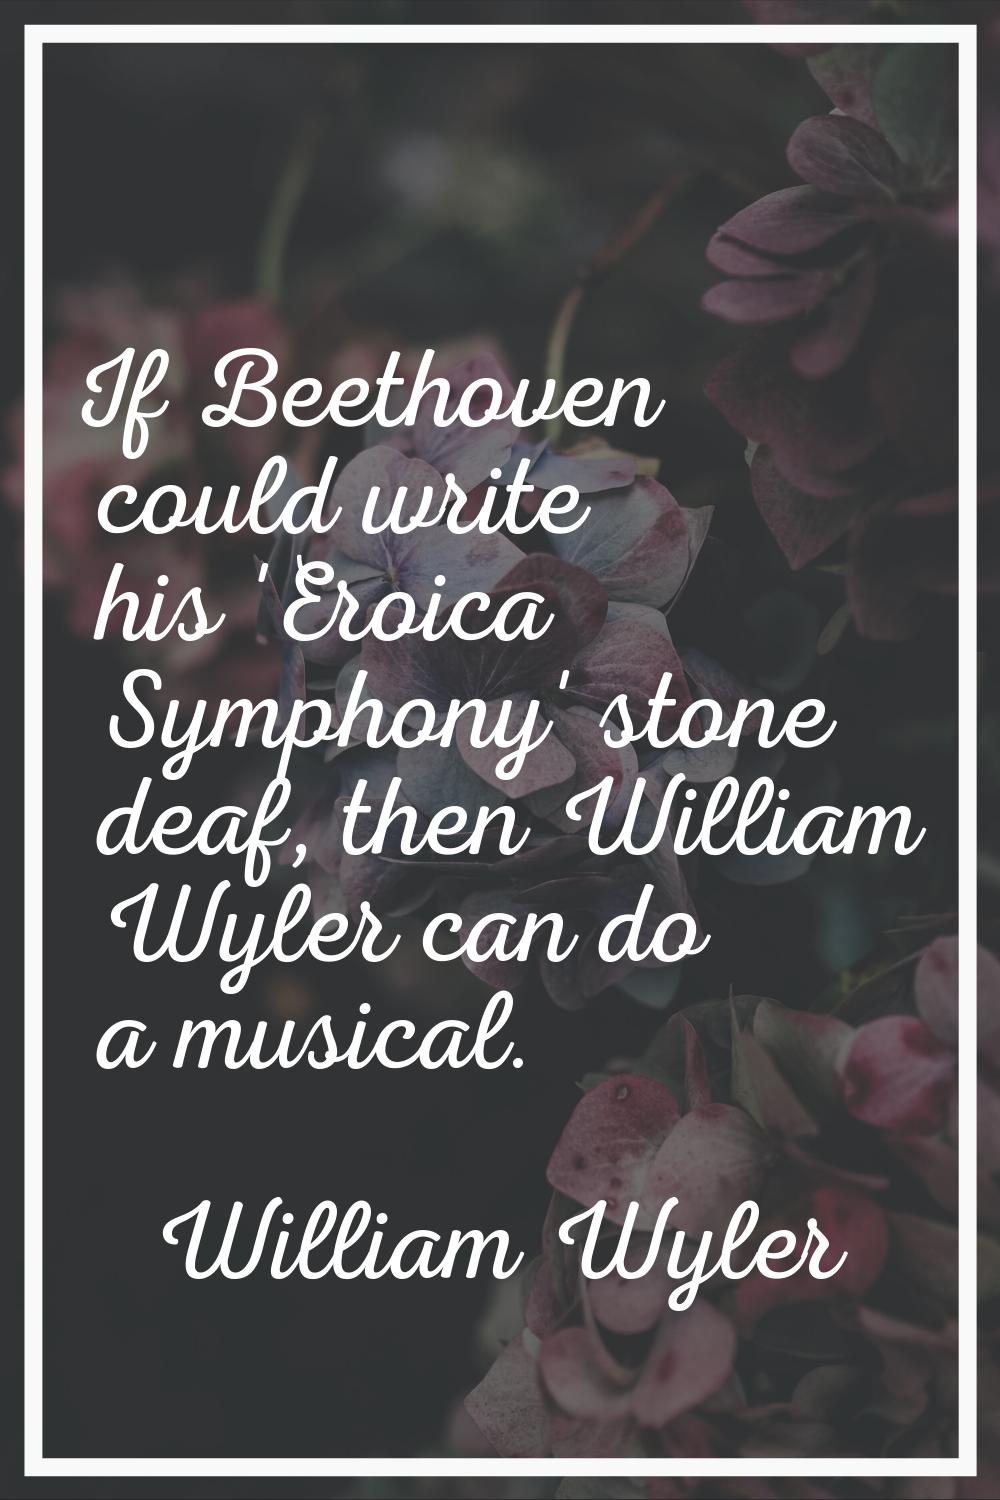 If Beethoven could write his 'Eroica Symphony' stone deaf, then William Wyler can do a musical.